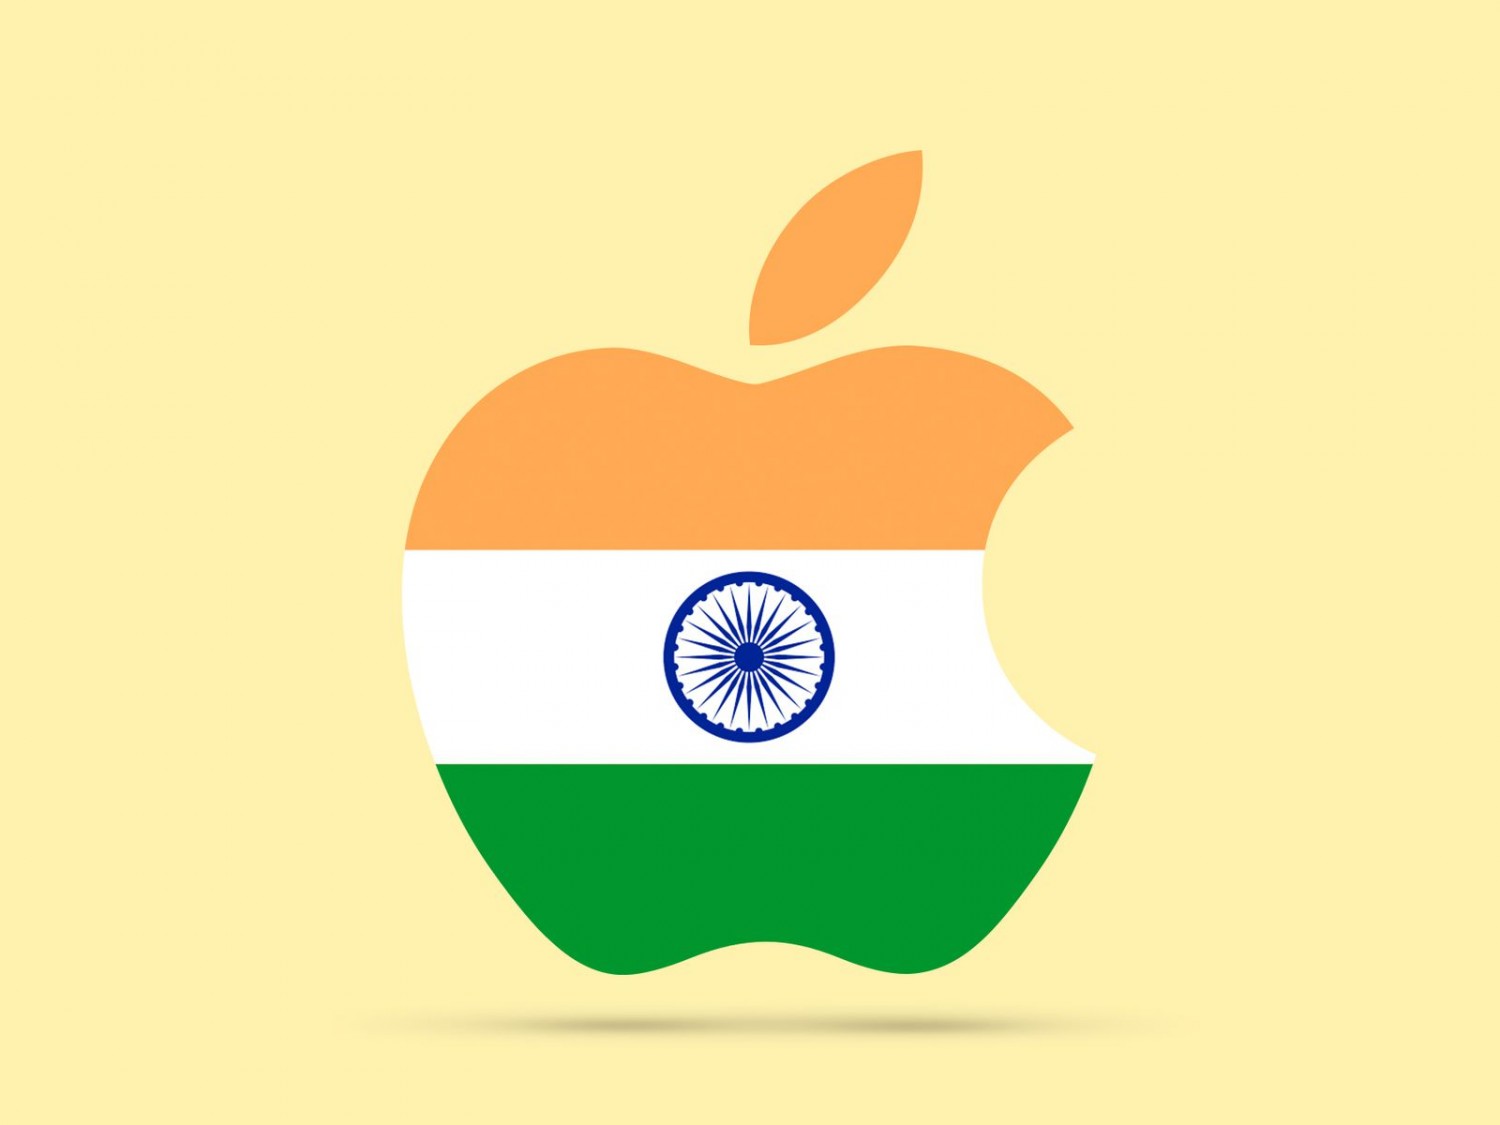 Apple is involved in antitrust cases due to in-game payment problems in India